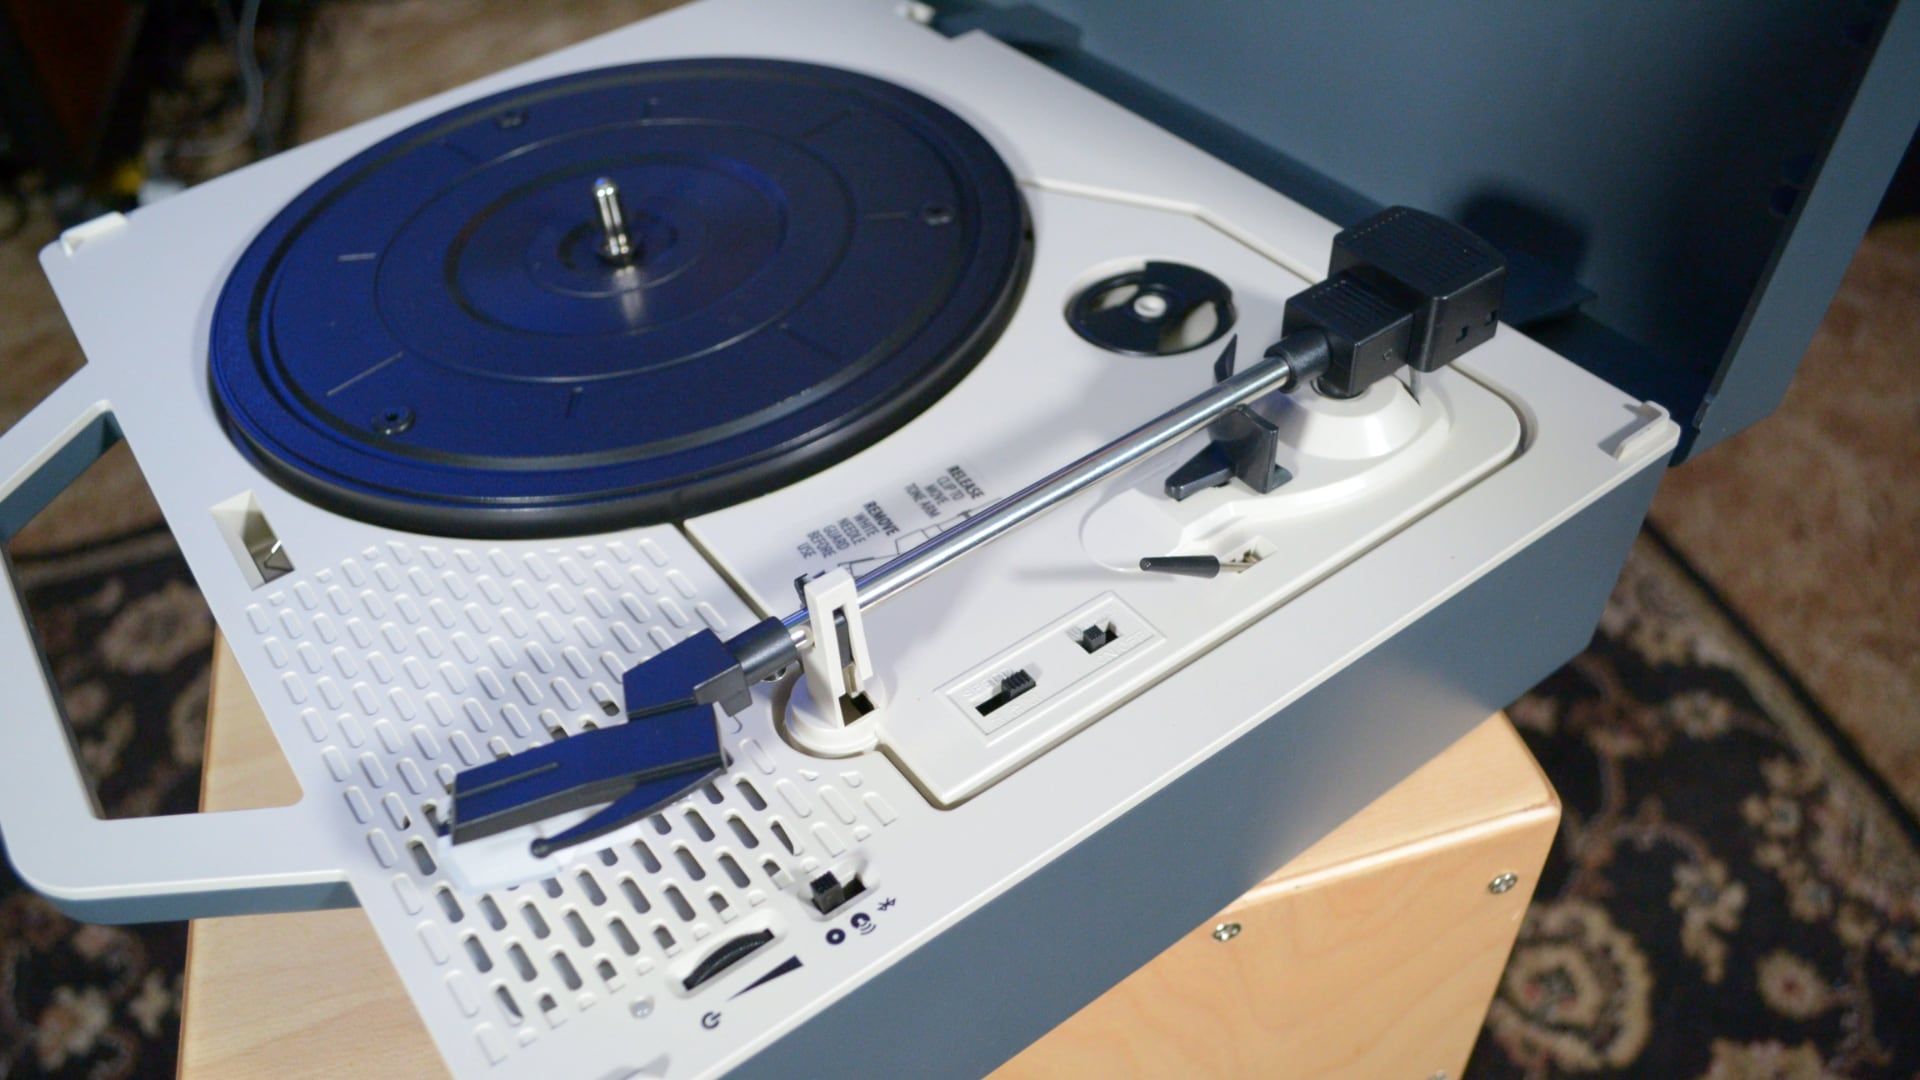 Victrola Re-Spin platter and tonearm